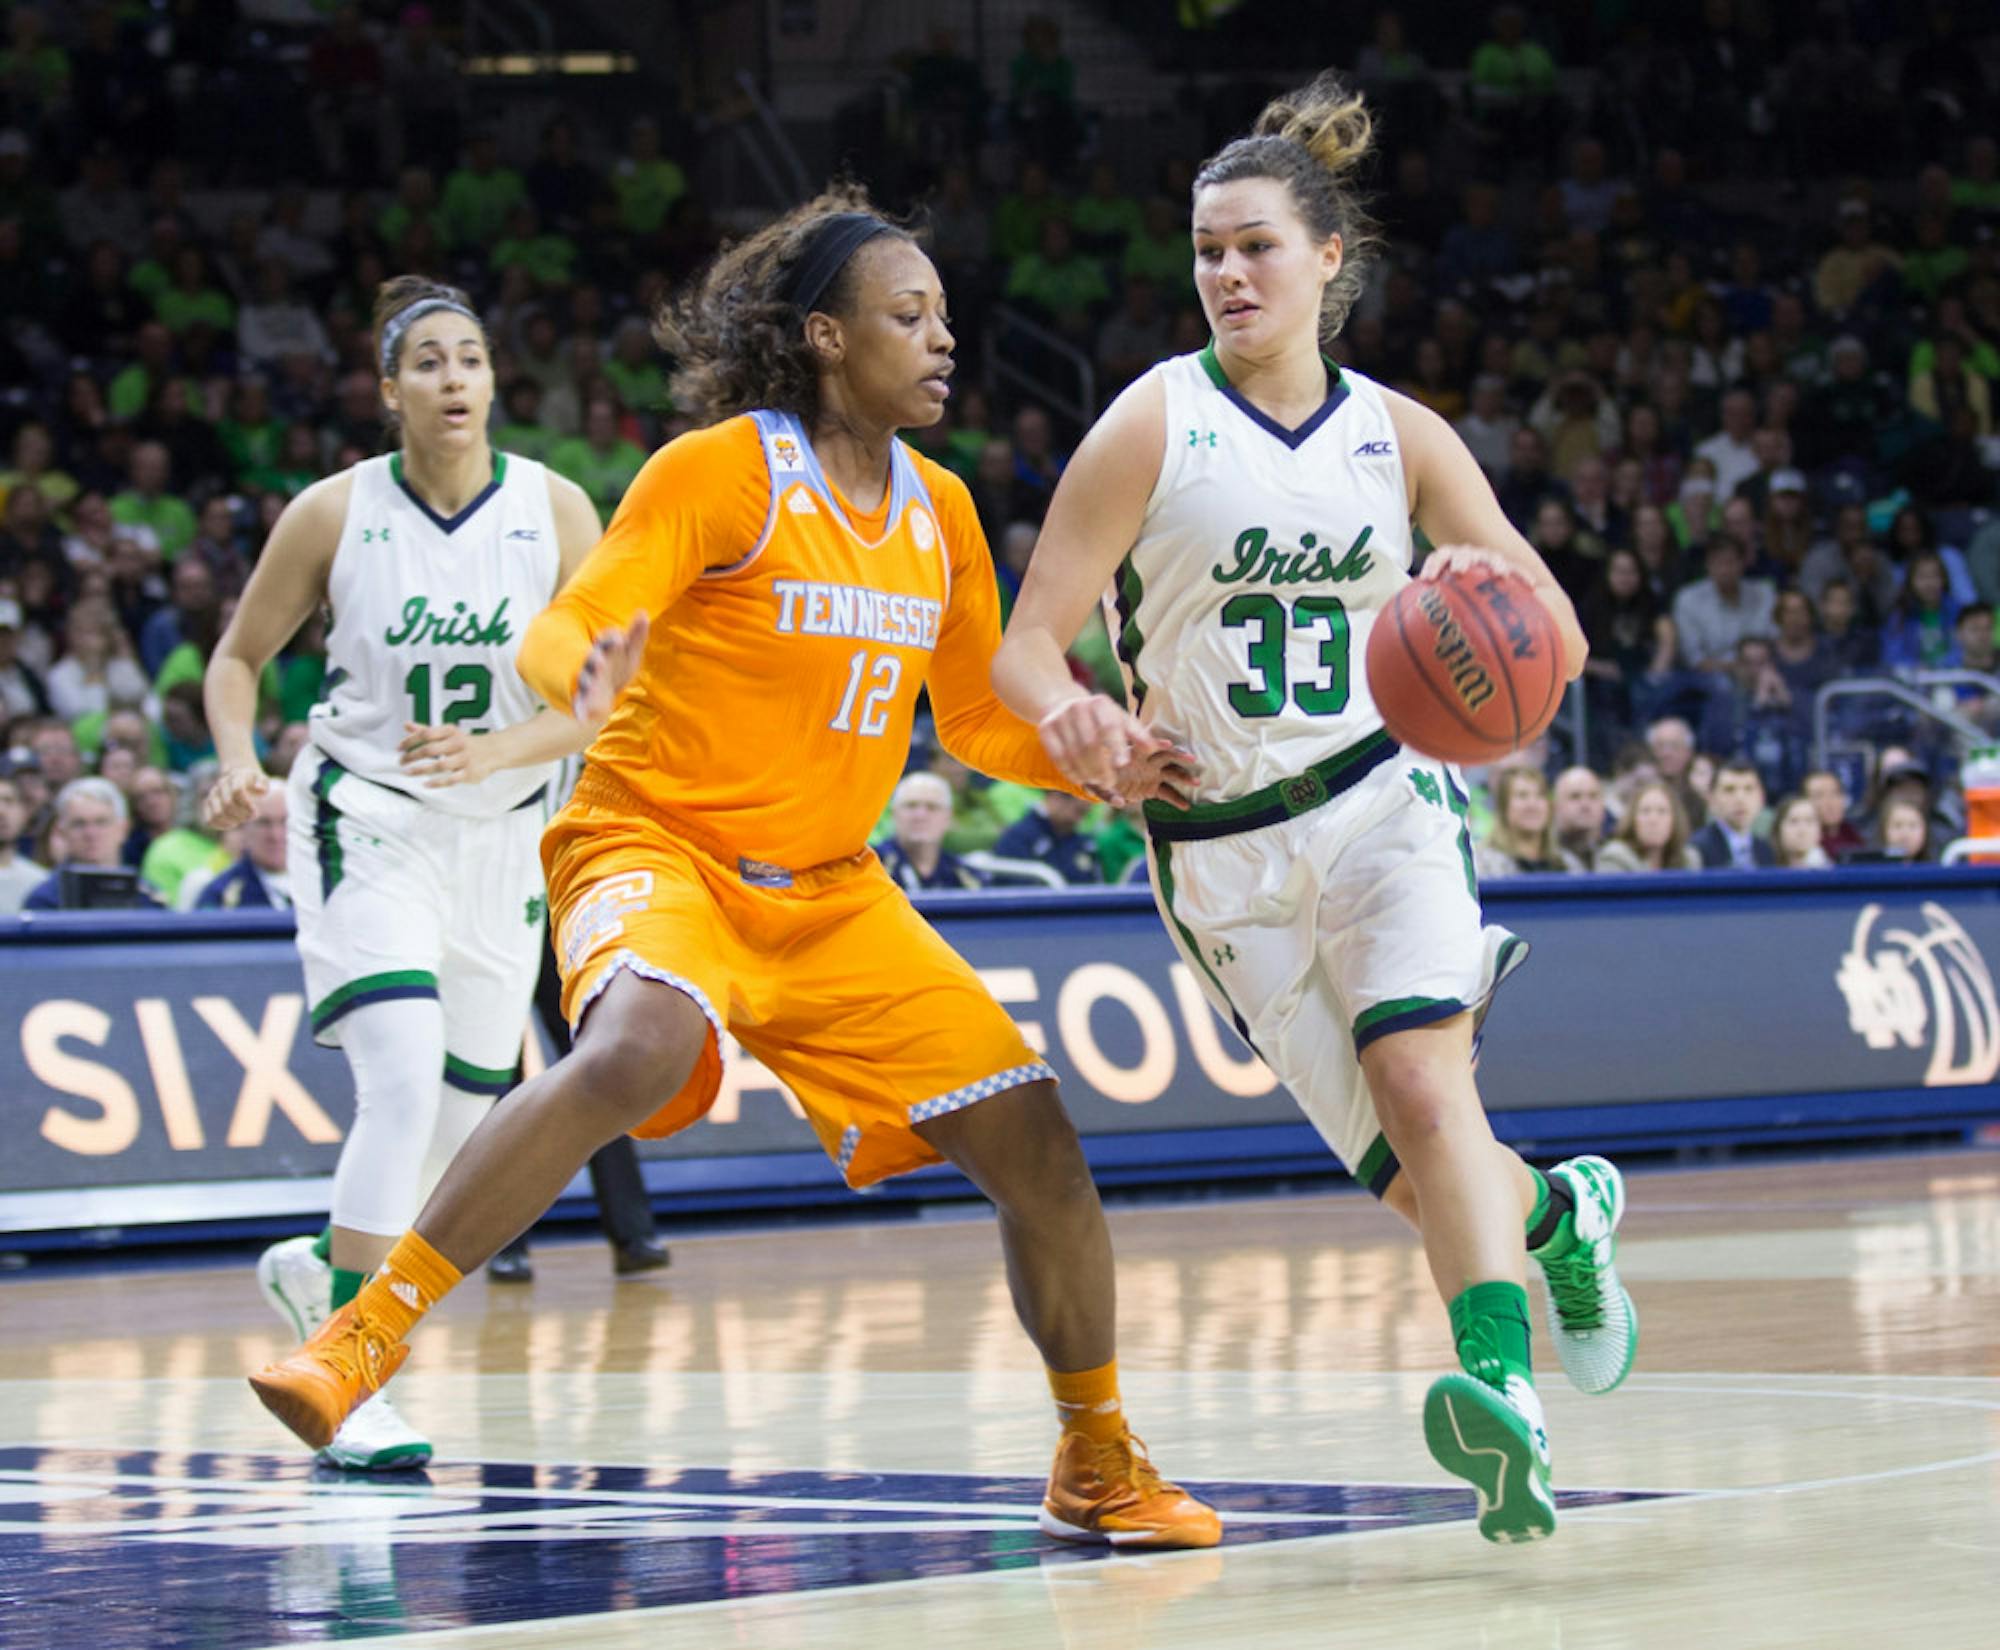 Irish freshman forward Kathryn Westbeld drives to the hoop during Notre Dame’s 88-77 win over  Tennessee on Monday at Purcell Pavilion.